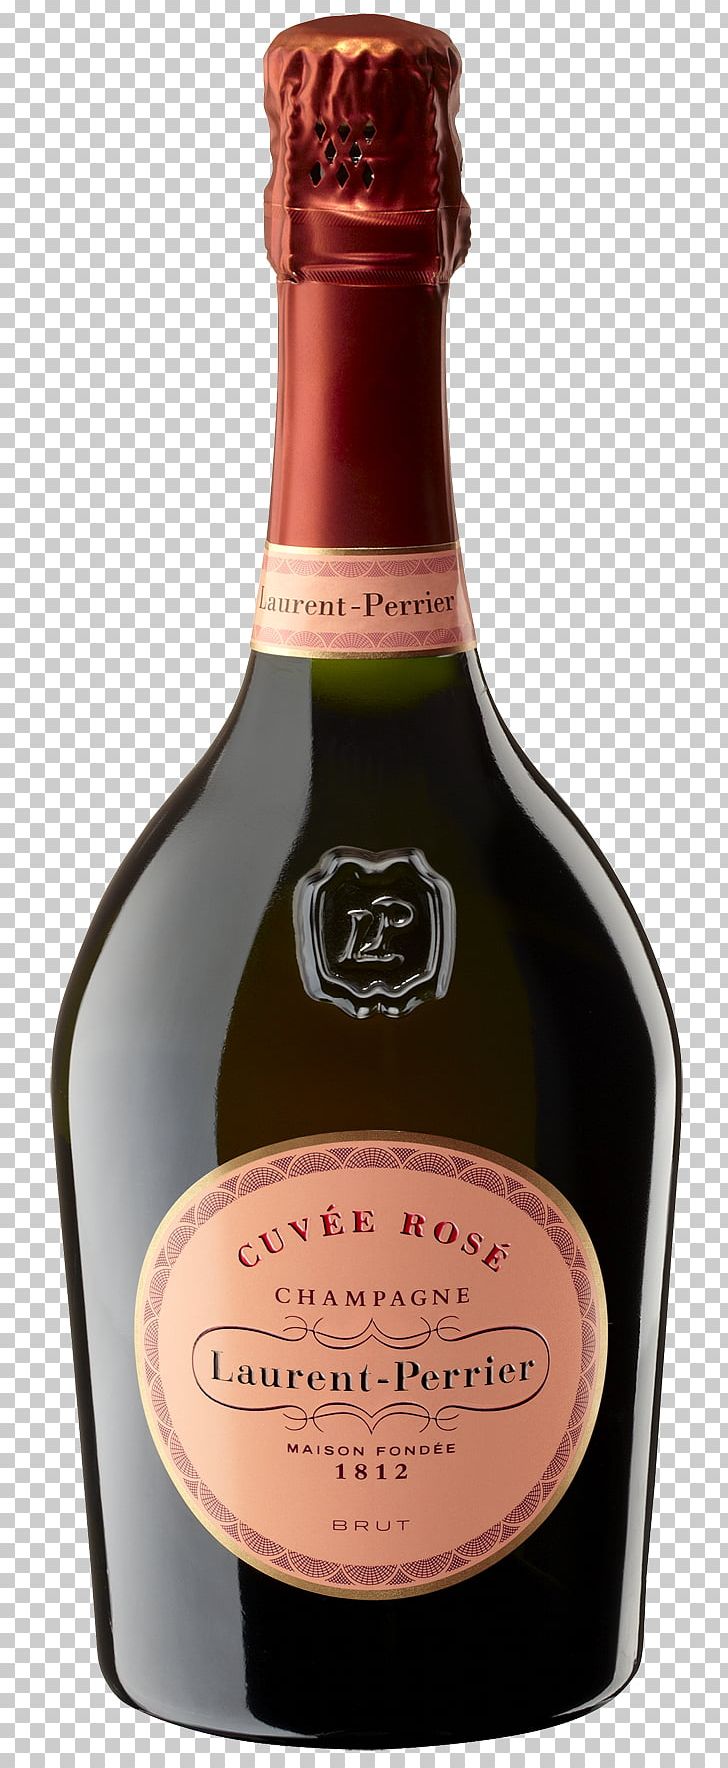 Champagne Sparkling Wine Rosé Pinot Noir PNG, Clipart, Alcoholic Beverage, Bottle, Brut, Champagne, Cuvee Free PNG Download